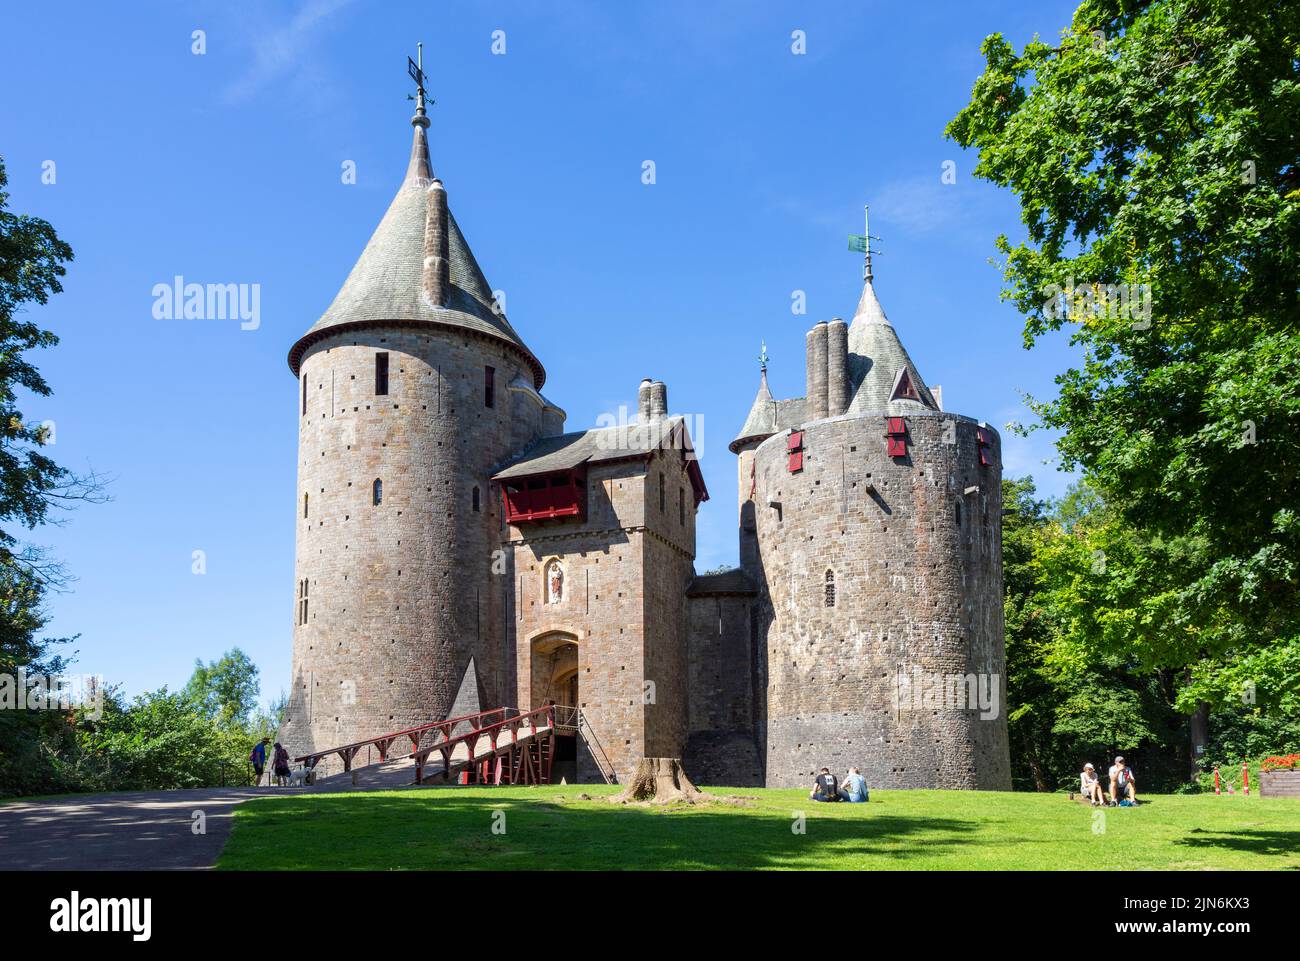 Turisti a Castell Coch Castle Coch o Red Castle Tongwynlais Cardiff South Wales UK GB Europe Foto Stock